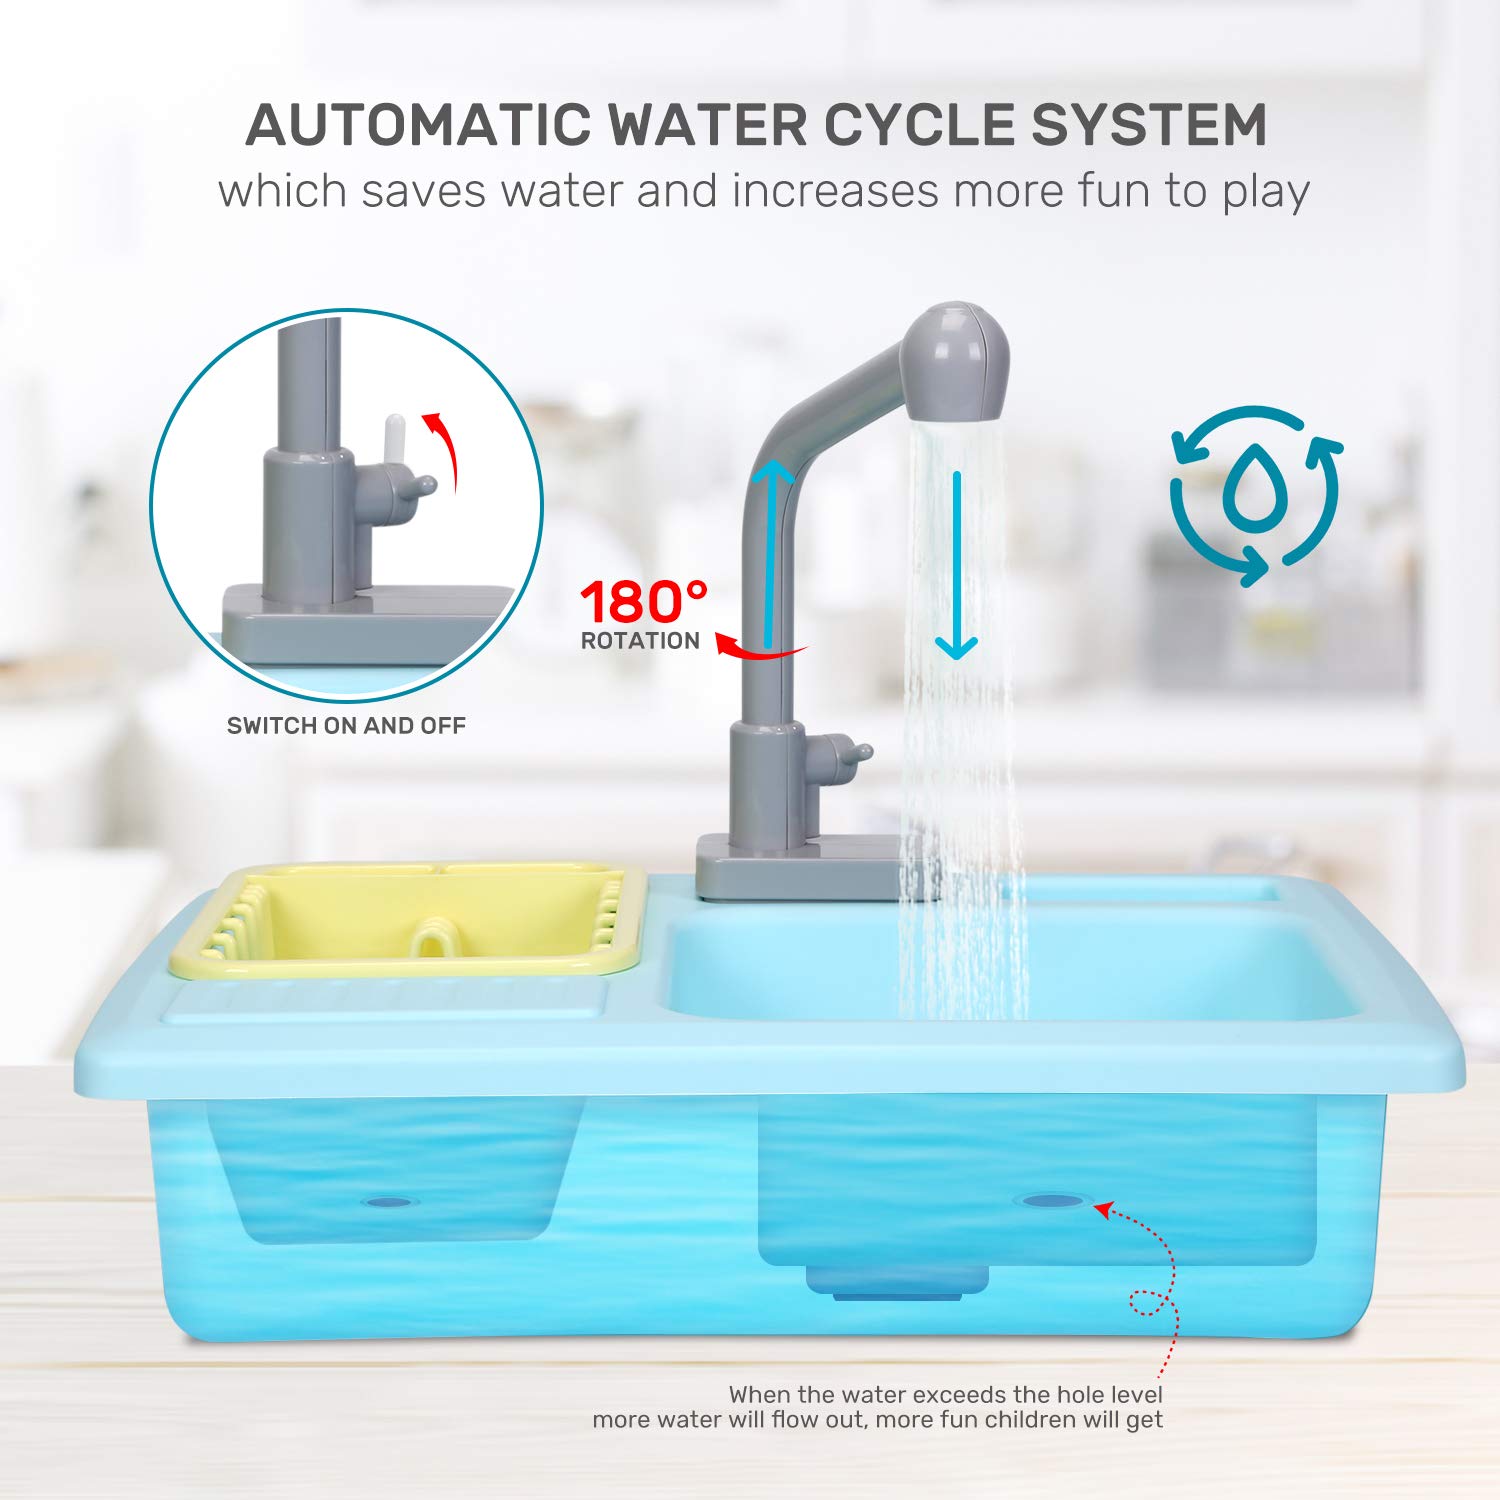 Cute Stone Color Changing Kitchen Sink Pretend Play Set Toys for Kids Gifts xmas 